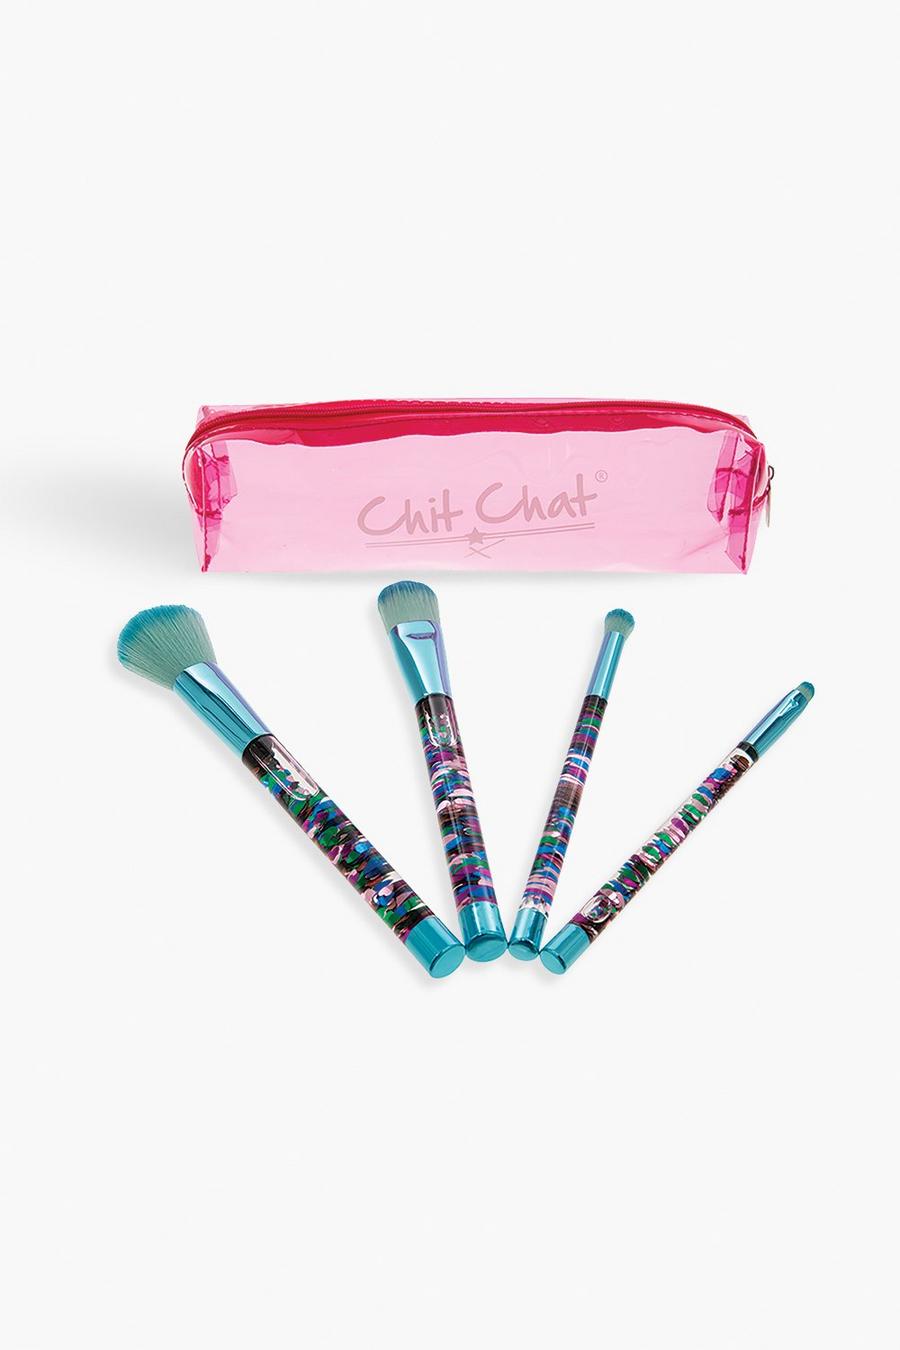 Chit Chat - Glitter Brushes image number 1